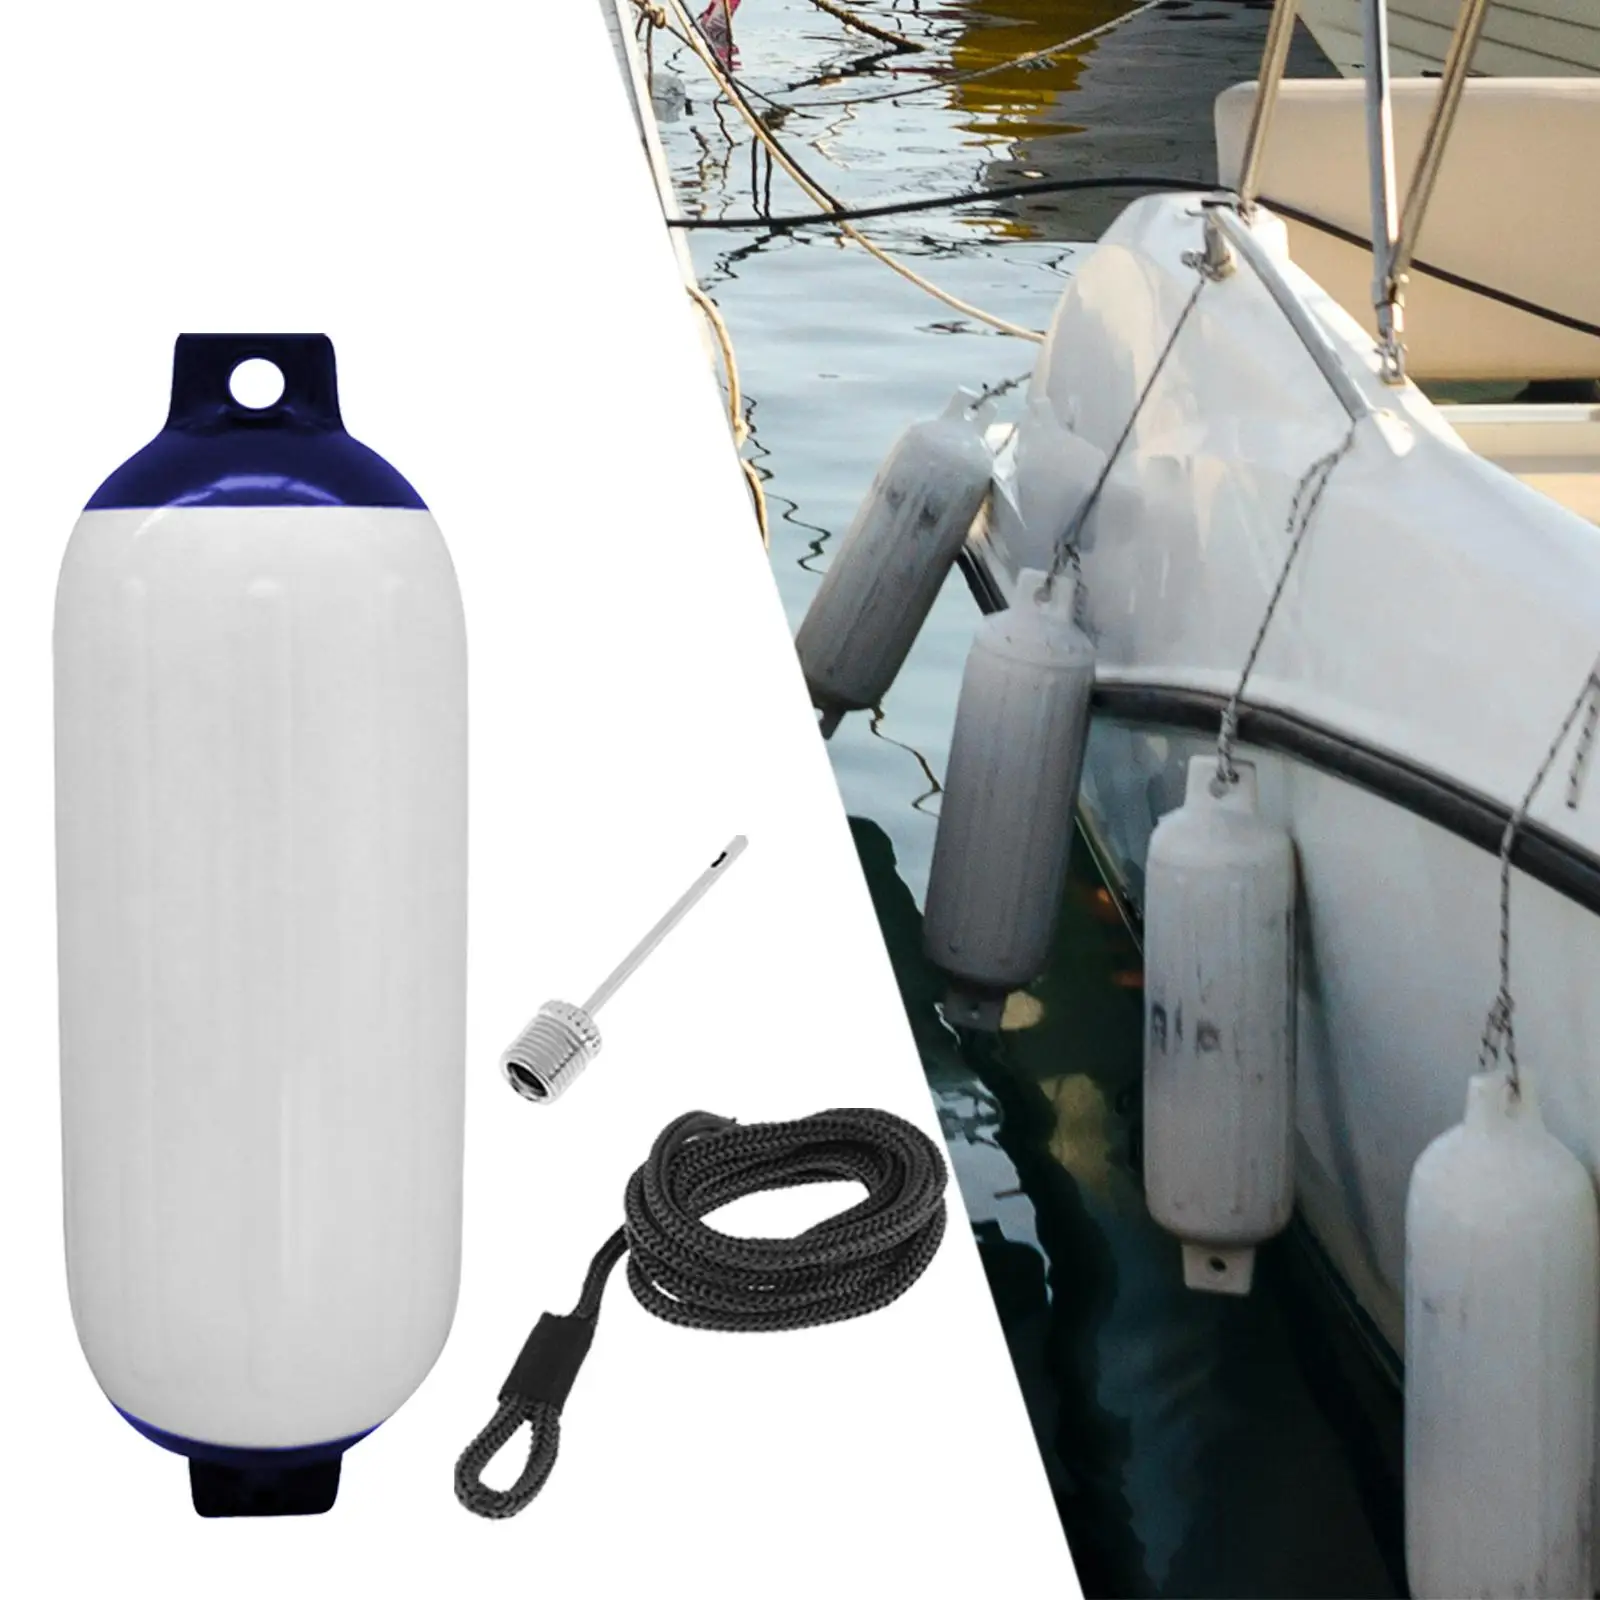 Boat Bumpers Fenders Boat Accessories Marina Dock Protector Boat Bumpers  for Docking Sailboats Pontoon Yachts Fishing Boats - AliExpress